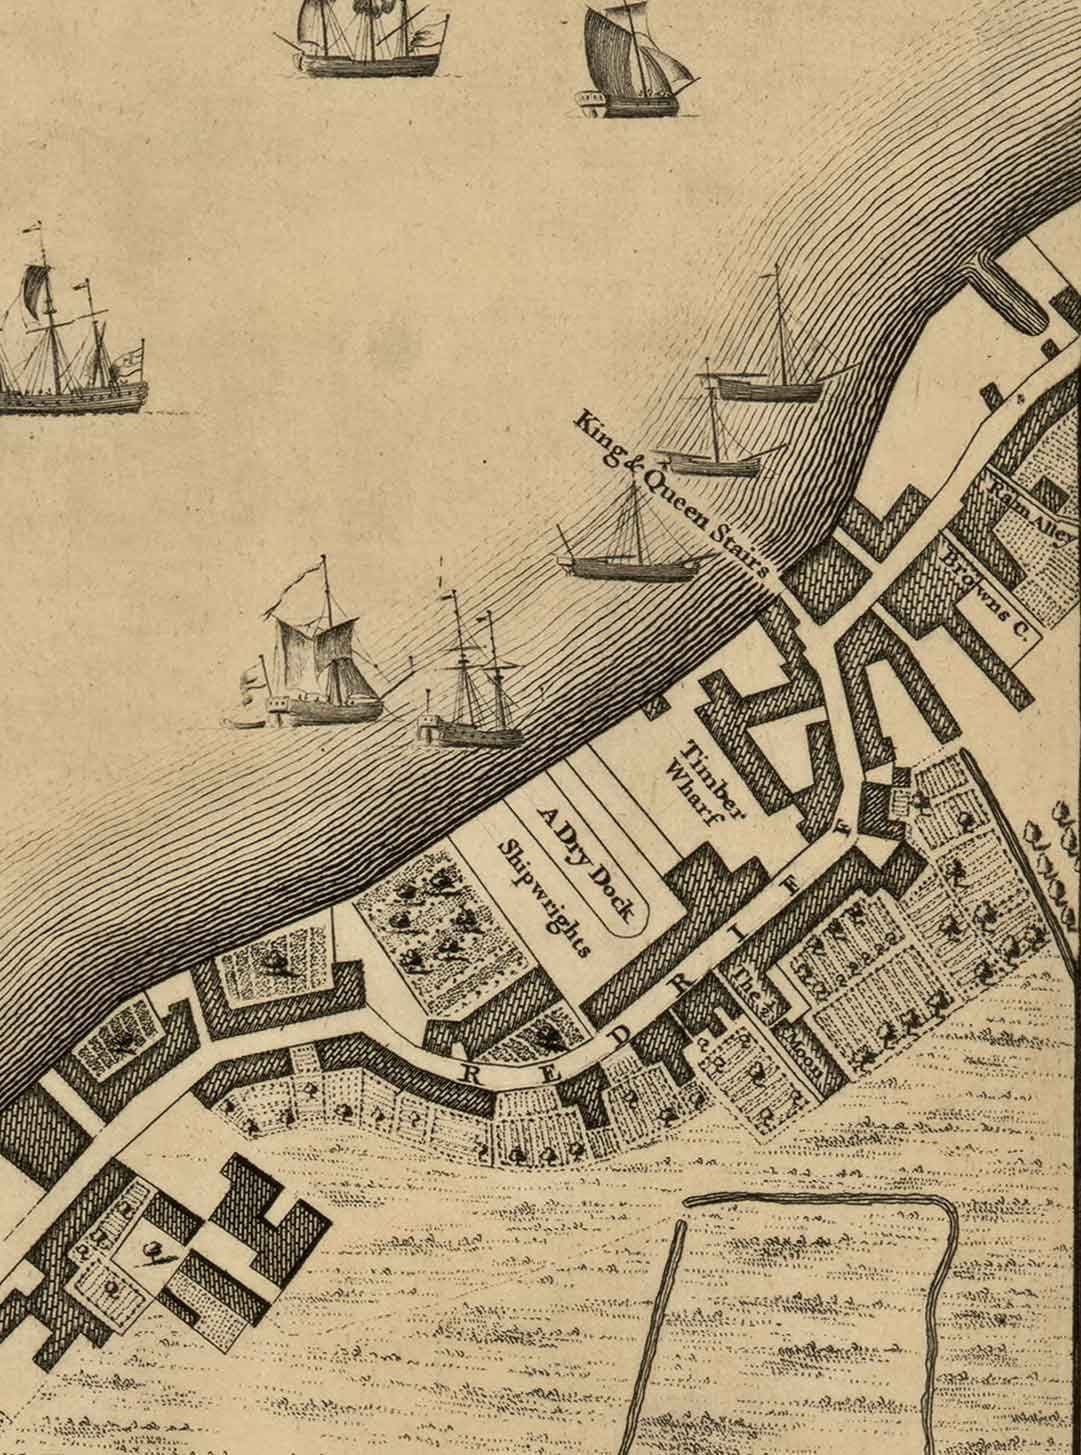 Alte Karte von John Rocque London, 1746, G2 - Wapping, Shadwell, Rotherhithe, Themse, Tower Hamlets, E1W, Southwark